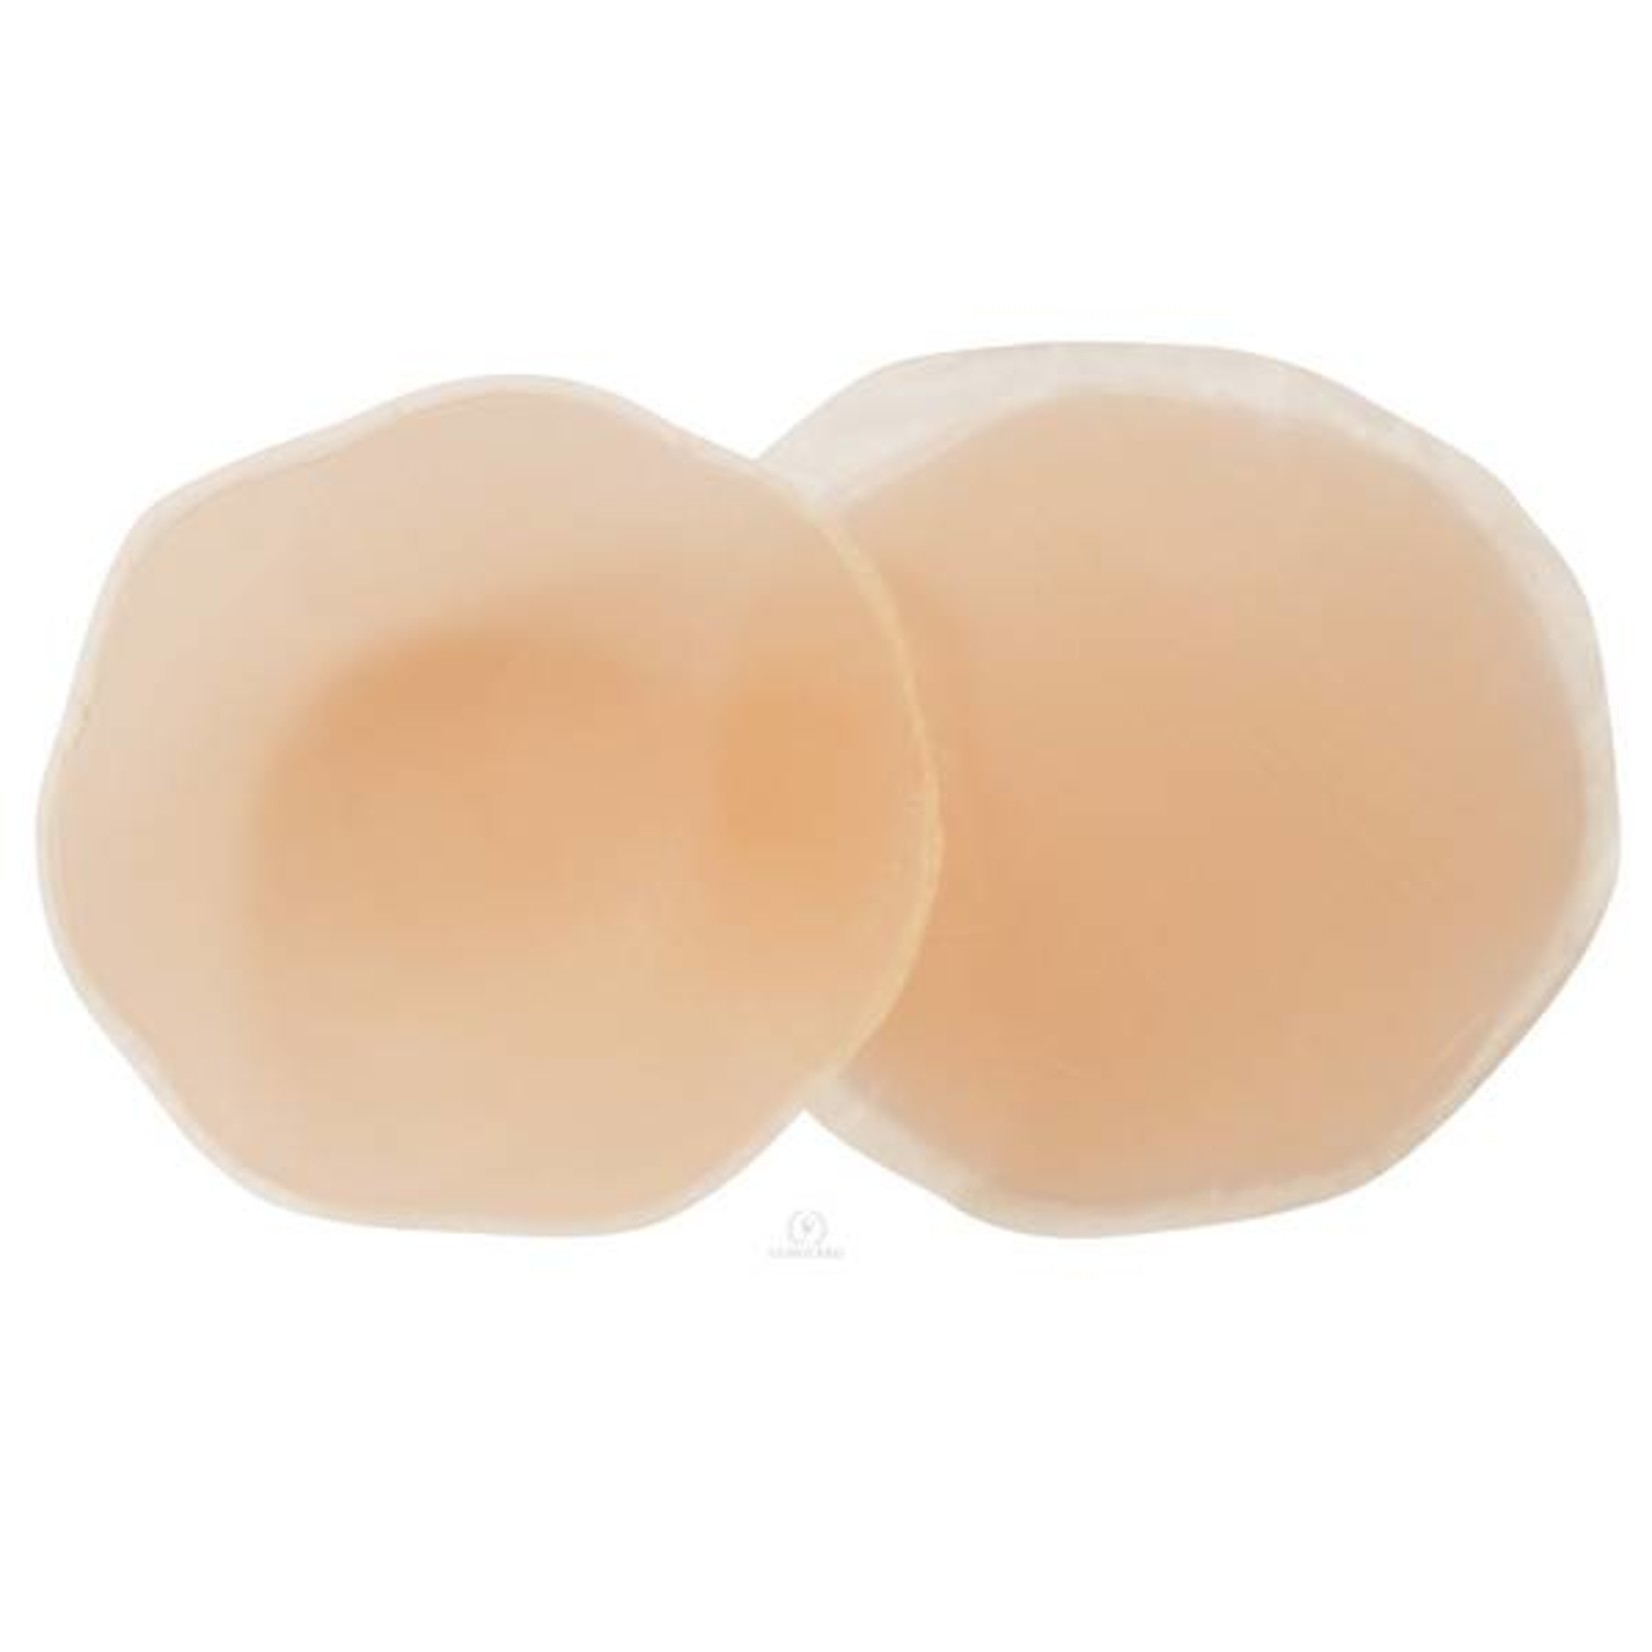 JE99- Silicon Modesty Petals Nipple Cover Nude OS